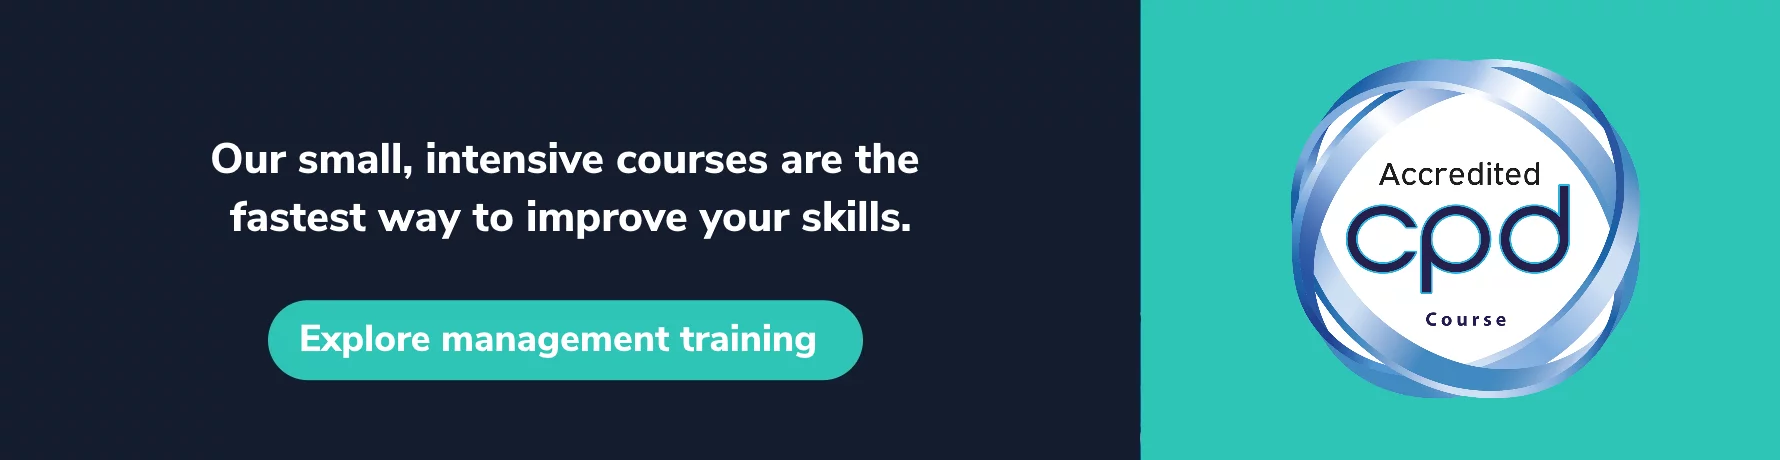 Our small, intensive courses are the fastest way to improve your skills.